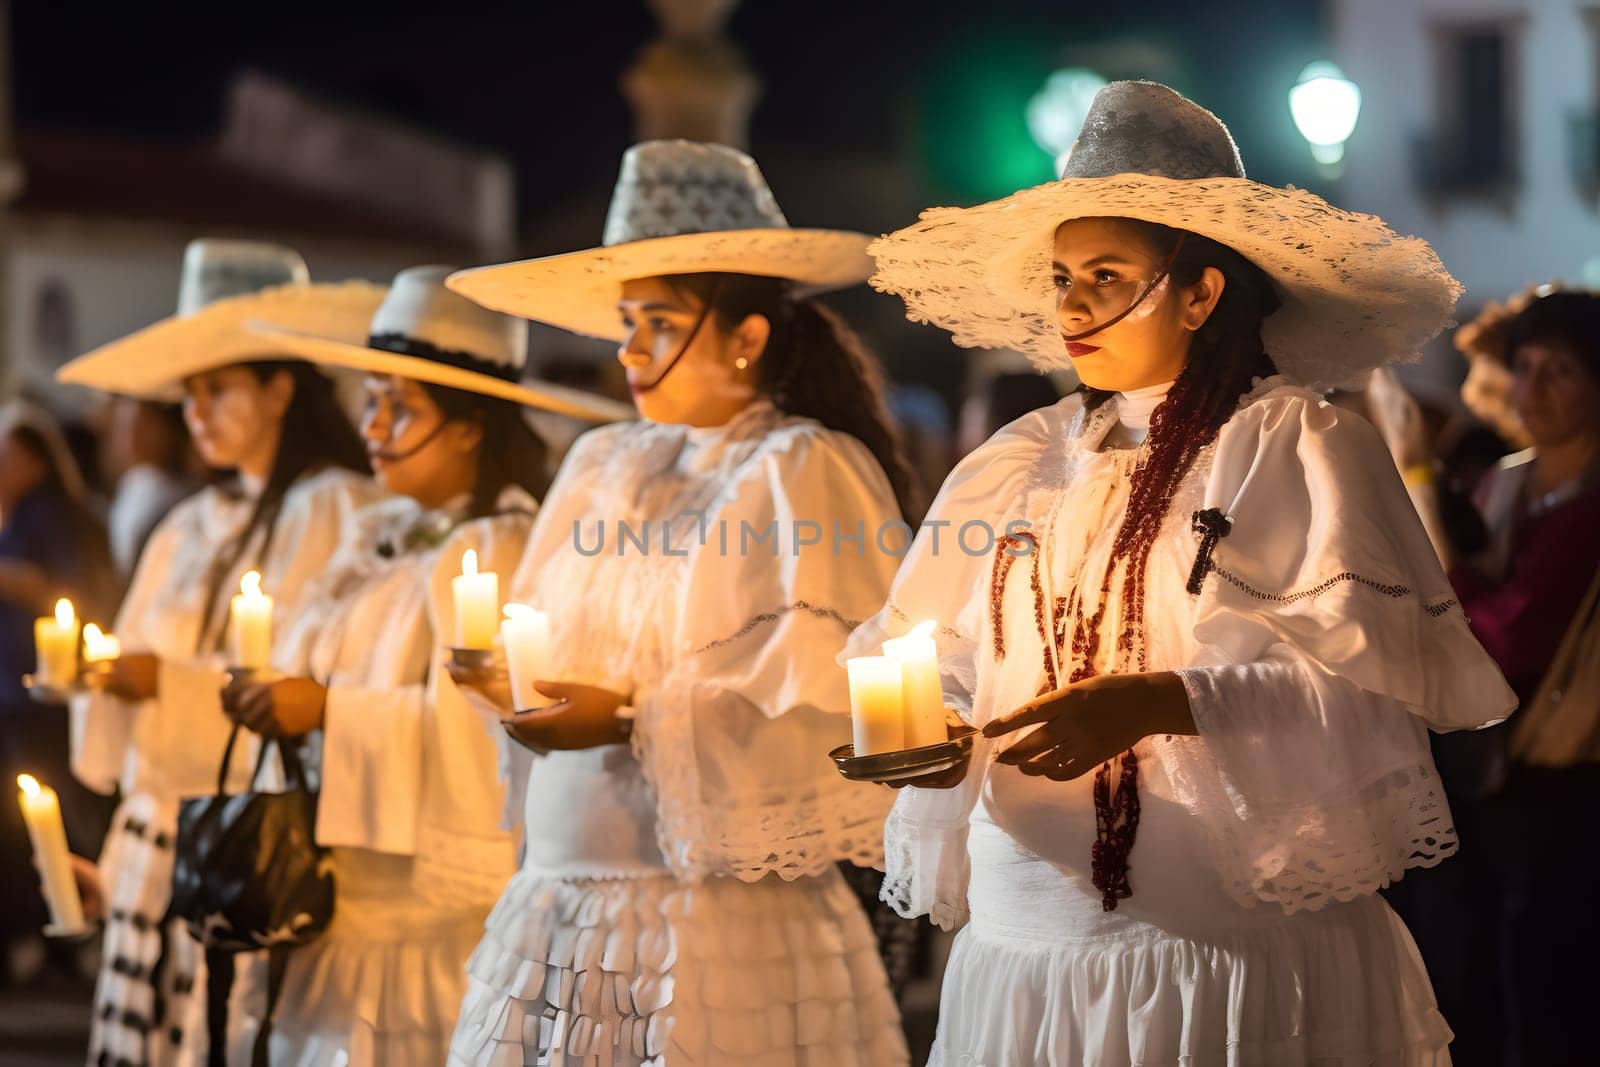 women with Catrina costumes and with skull make-up holding candles at the parade for dia de los muertos. Not based on any actual person, scene or pattern.